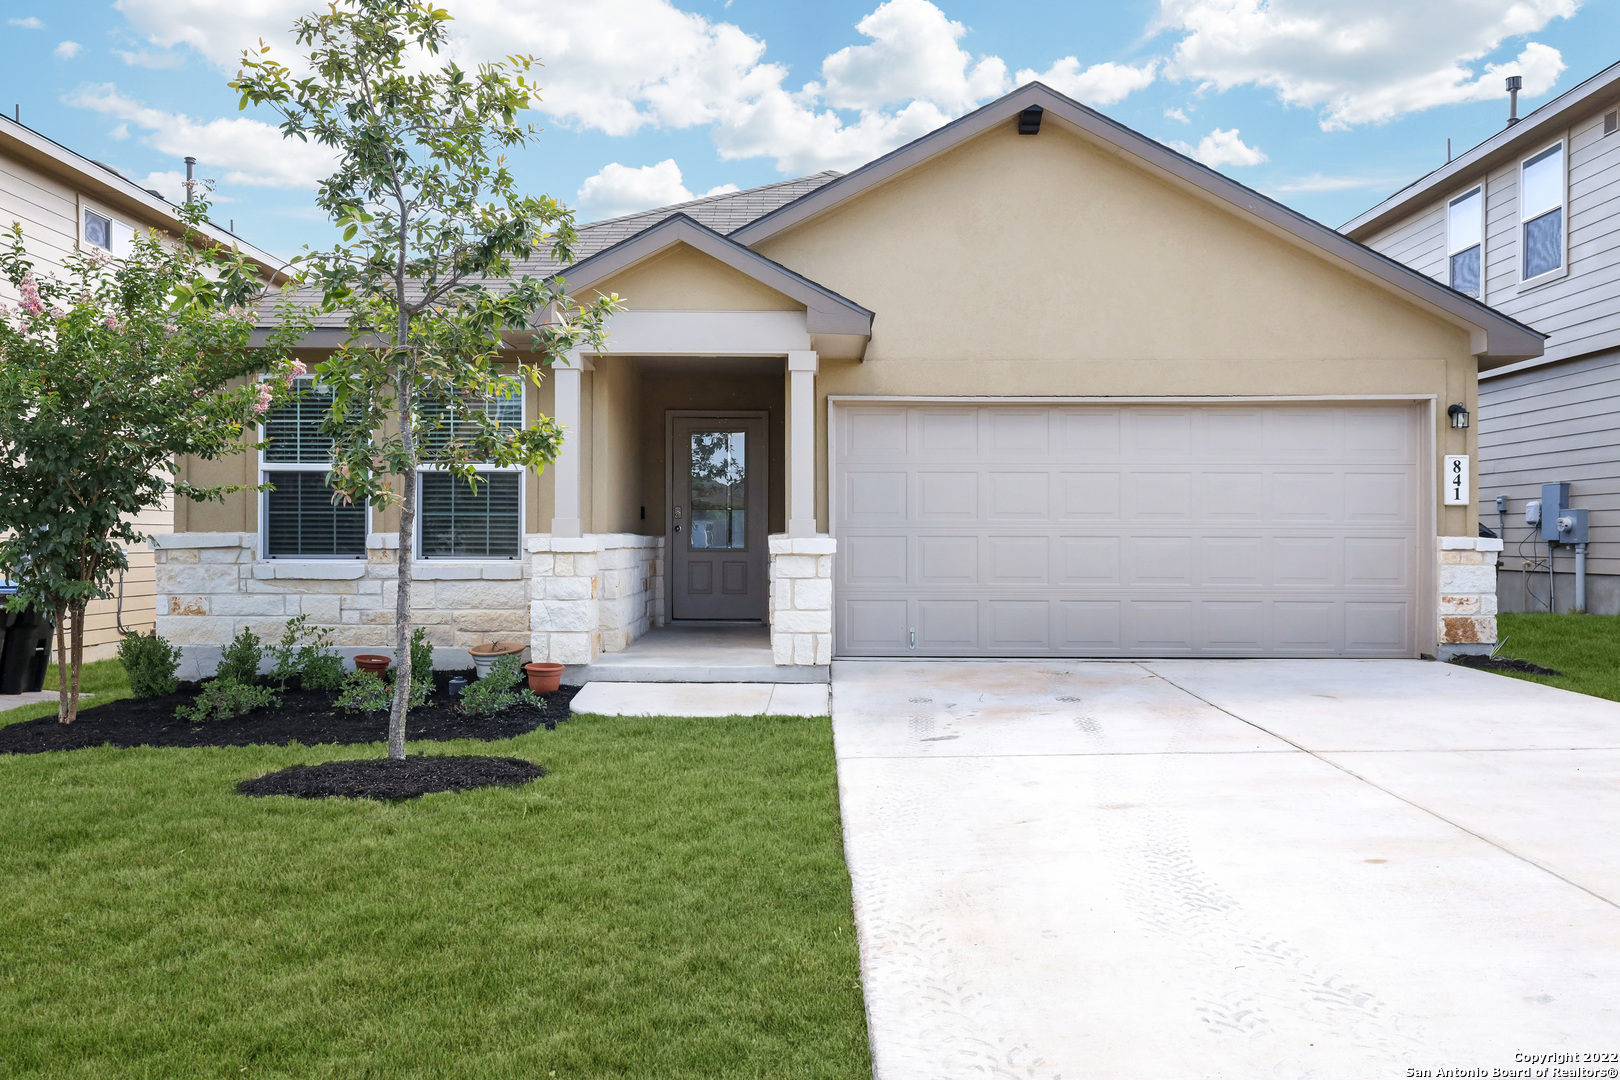 *Open House 06/24 & 6/25* Beautiful 4 bedroom 2 bath home in the highly sought out community of RedBird Ranch! Built in 2020, this fairly new home has an open floor plan great for entertaining!